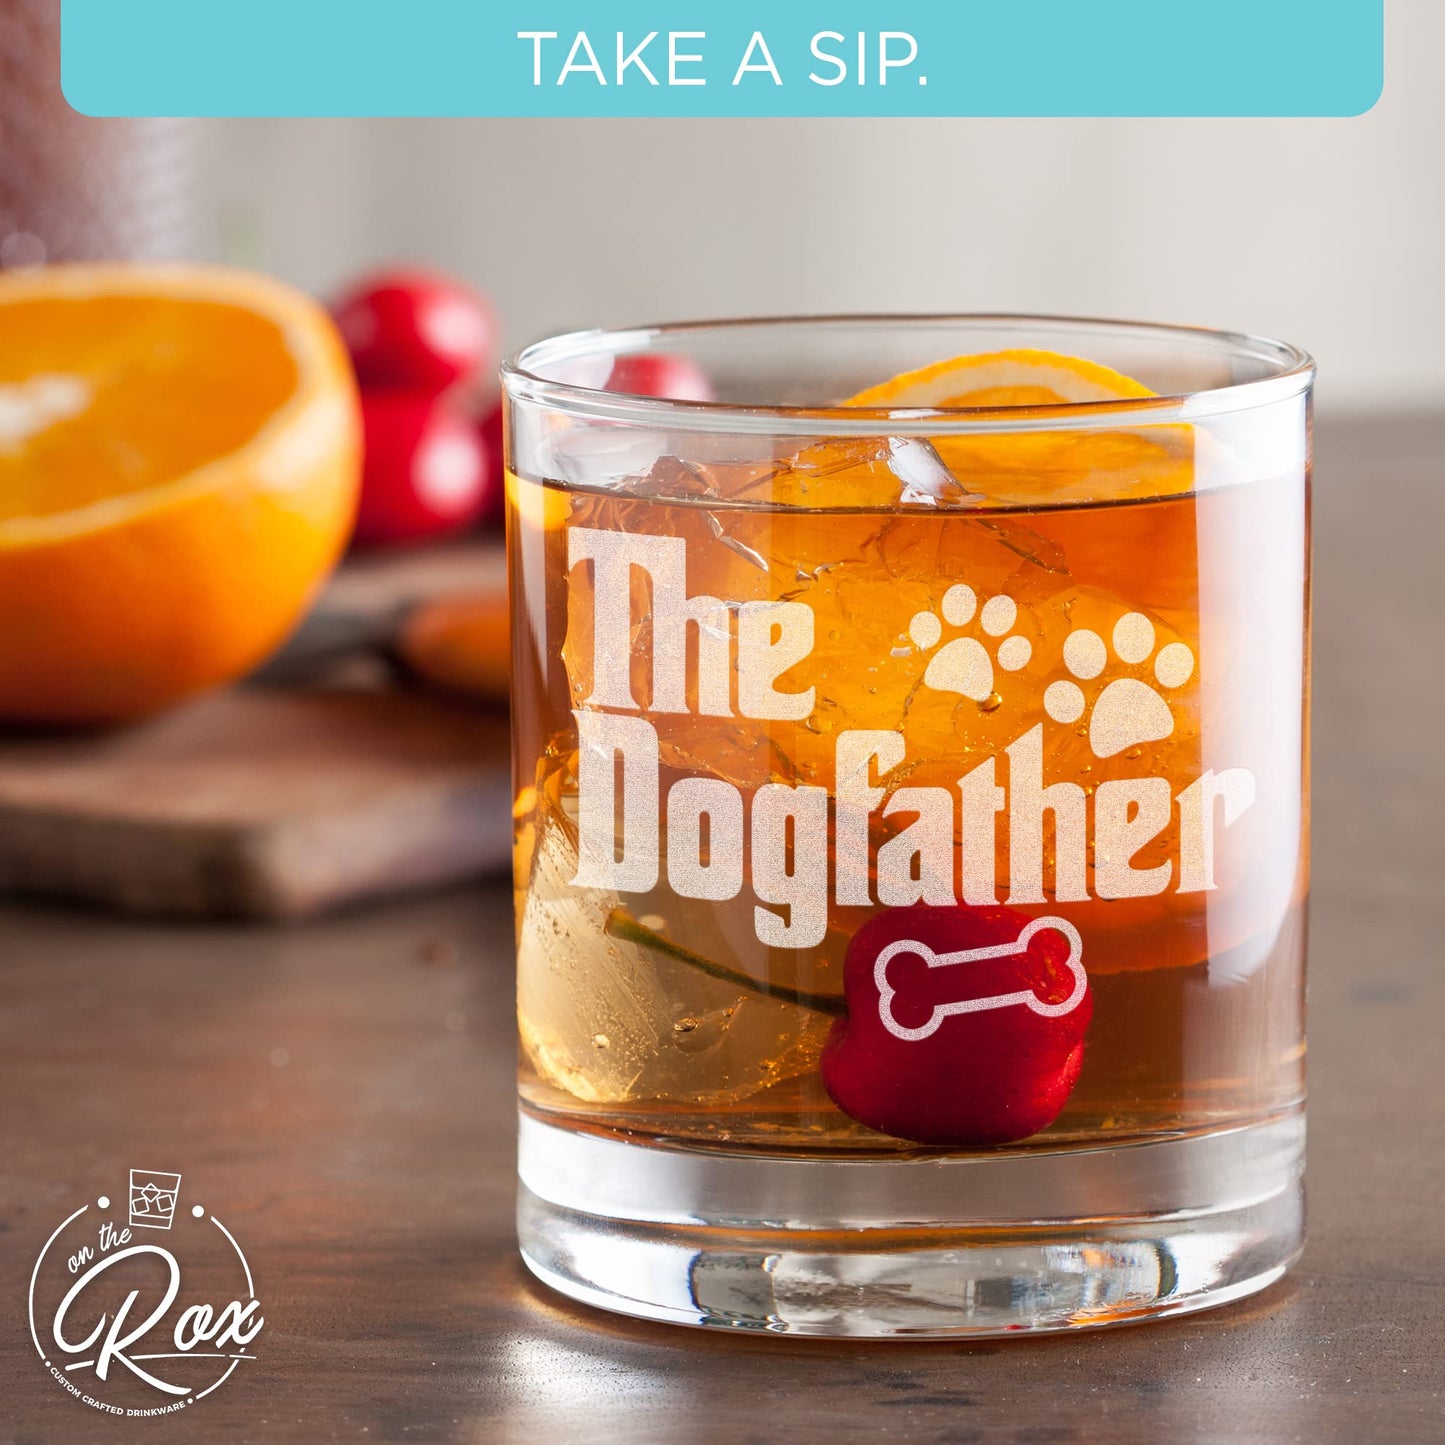 Whiskey Gifts for Dad- 11 Oz "Dog Father" Engraved Whiskey Glass - Father's Day Gift, Dad Birthday Gifts From Daughter, Wife or Son - Dad Bourbon Glass - Old Fashion Glass - 6 Designs To Choose From